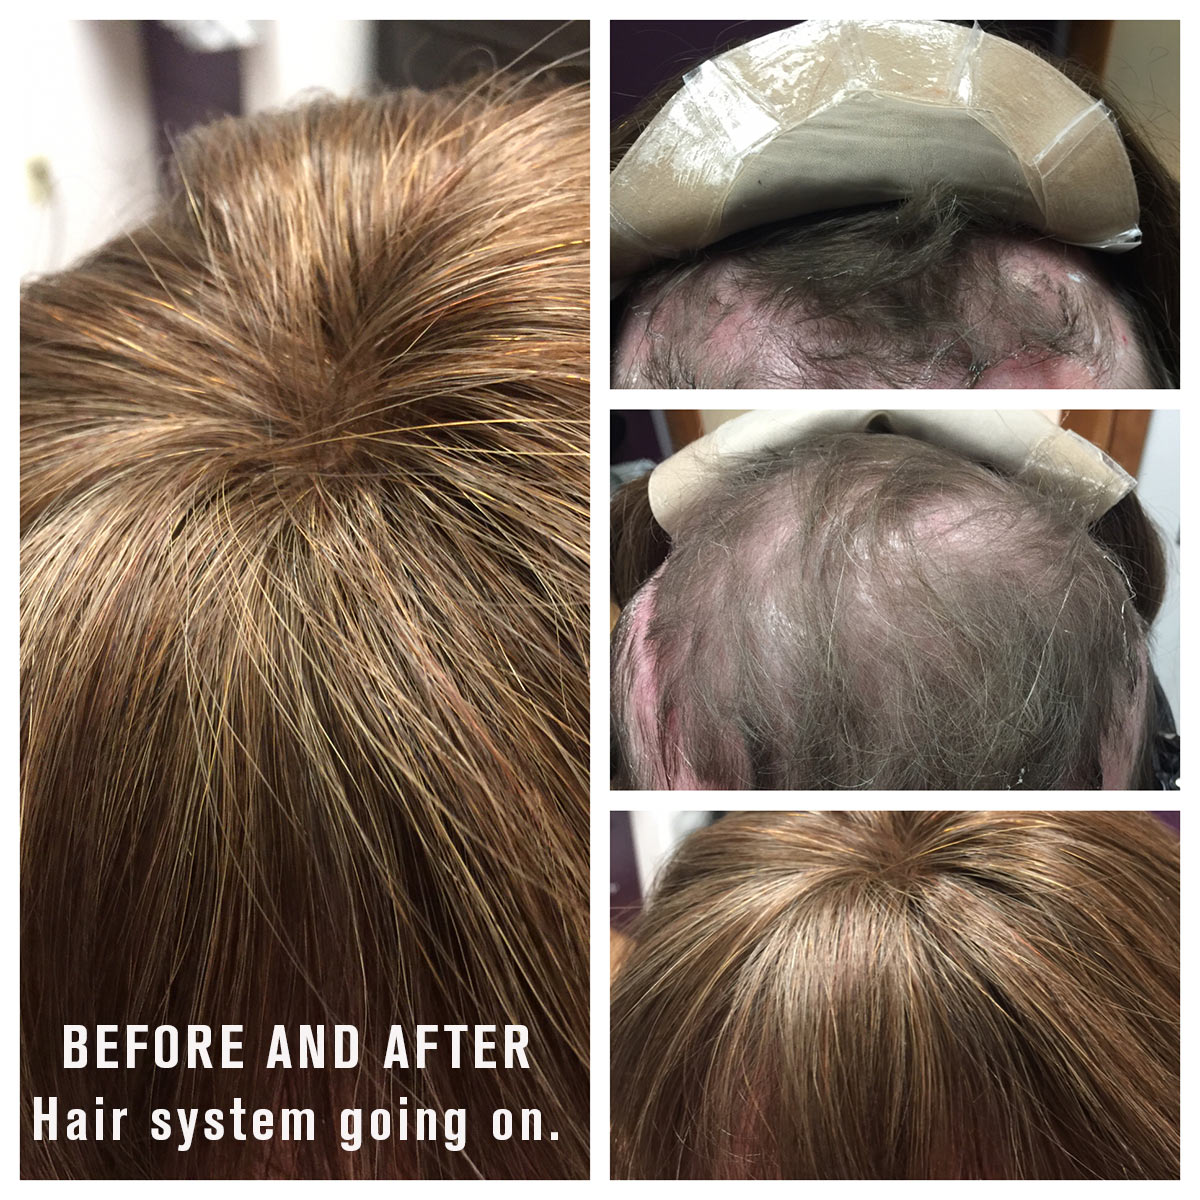 Hair System - Before and After